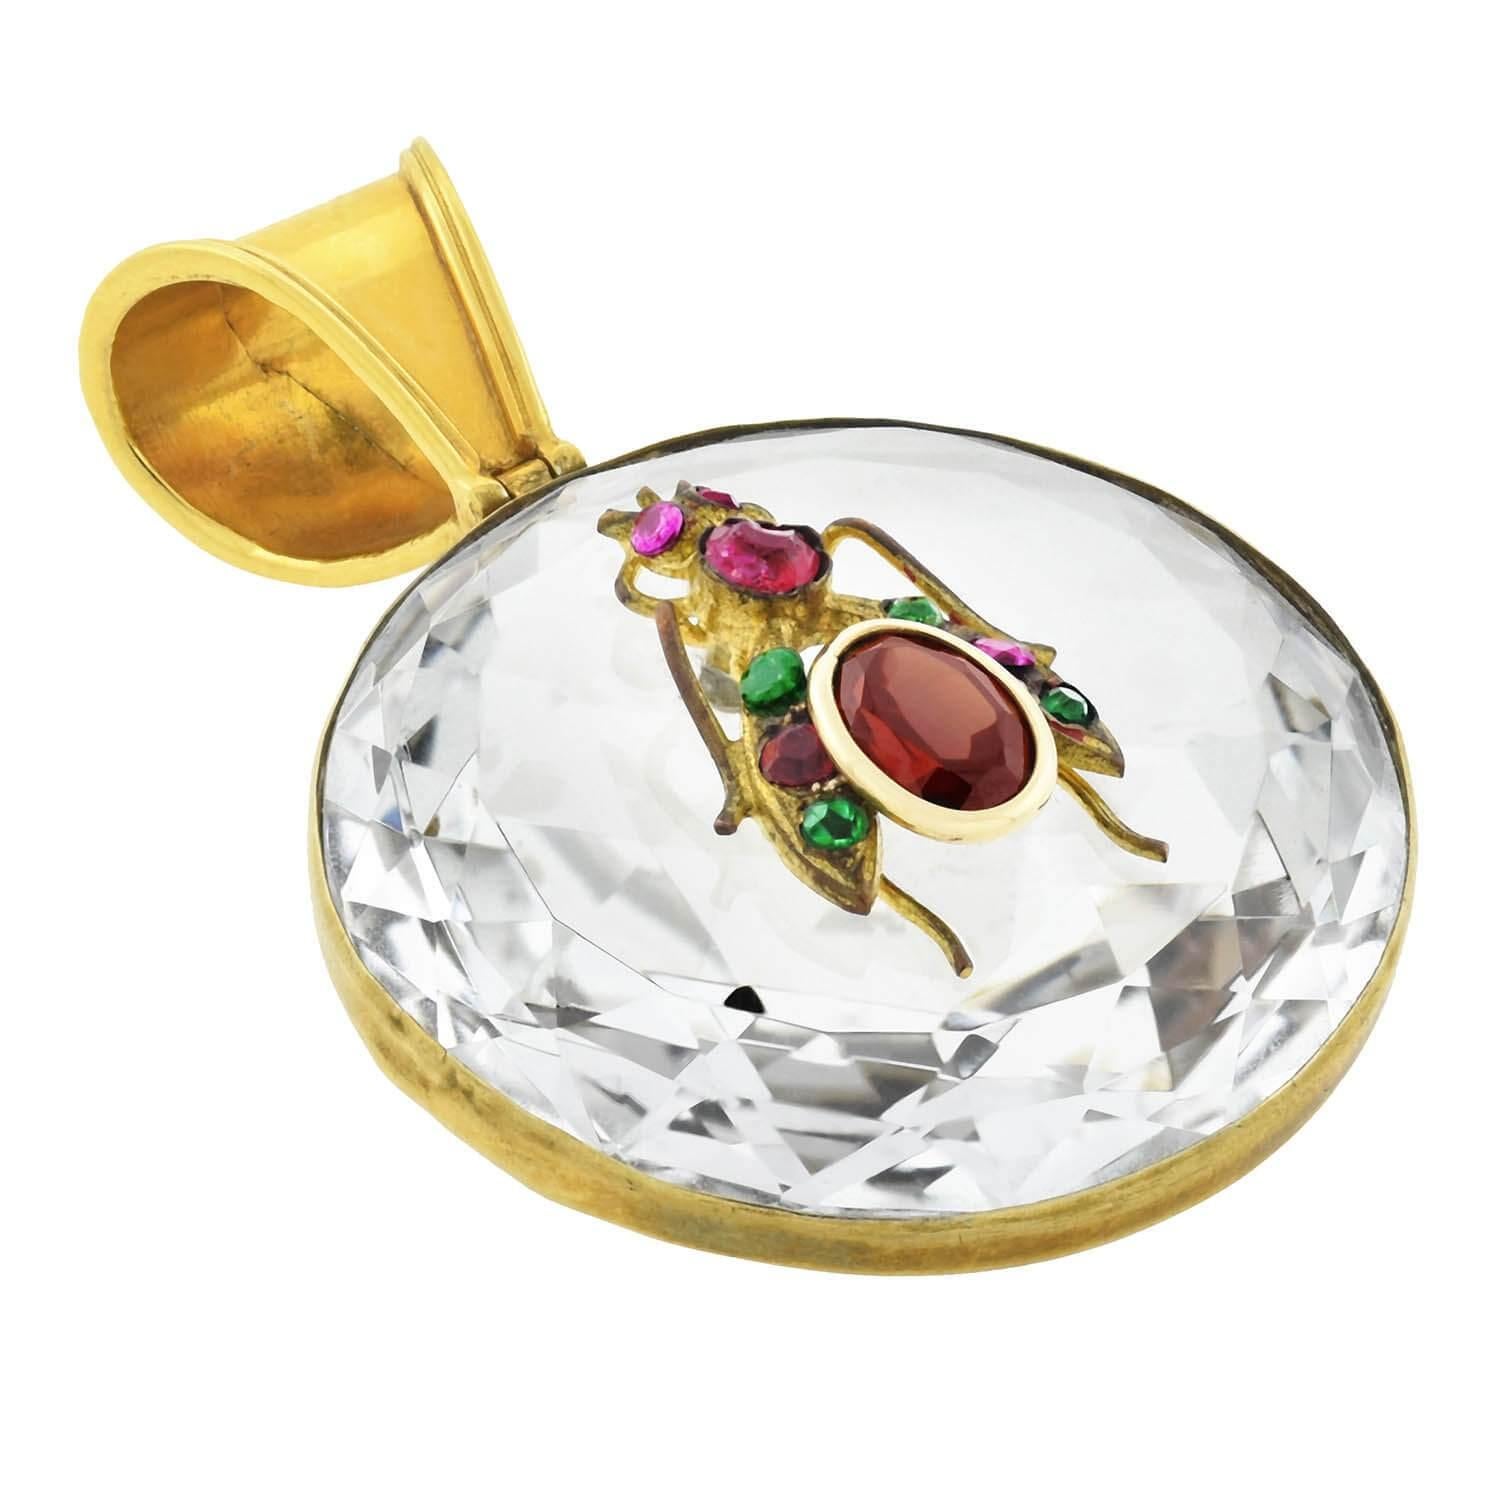 A simply outstanding rock crystal and gemstone insect pendant from the Victorian (ca1880s) era! This fabulous piece is crafted out of a relatively large rock crystal plaque, which is held within a vibrant 14kt yellow gold frame. The entire back of